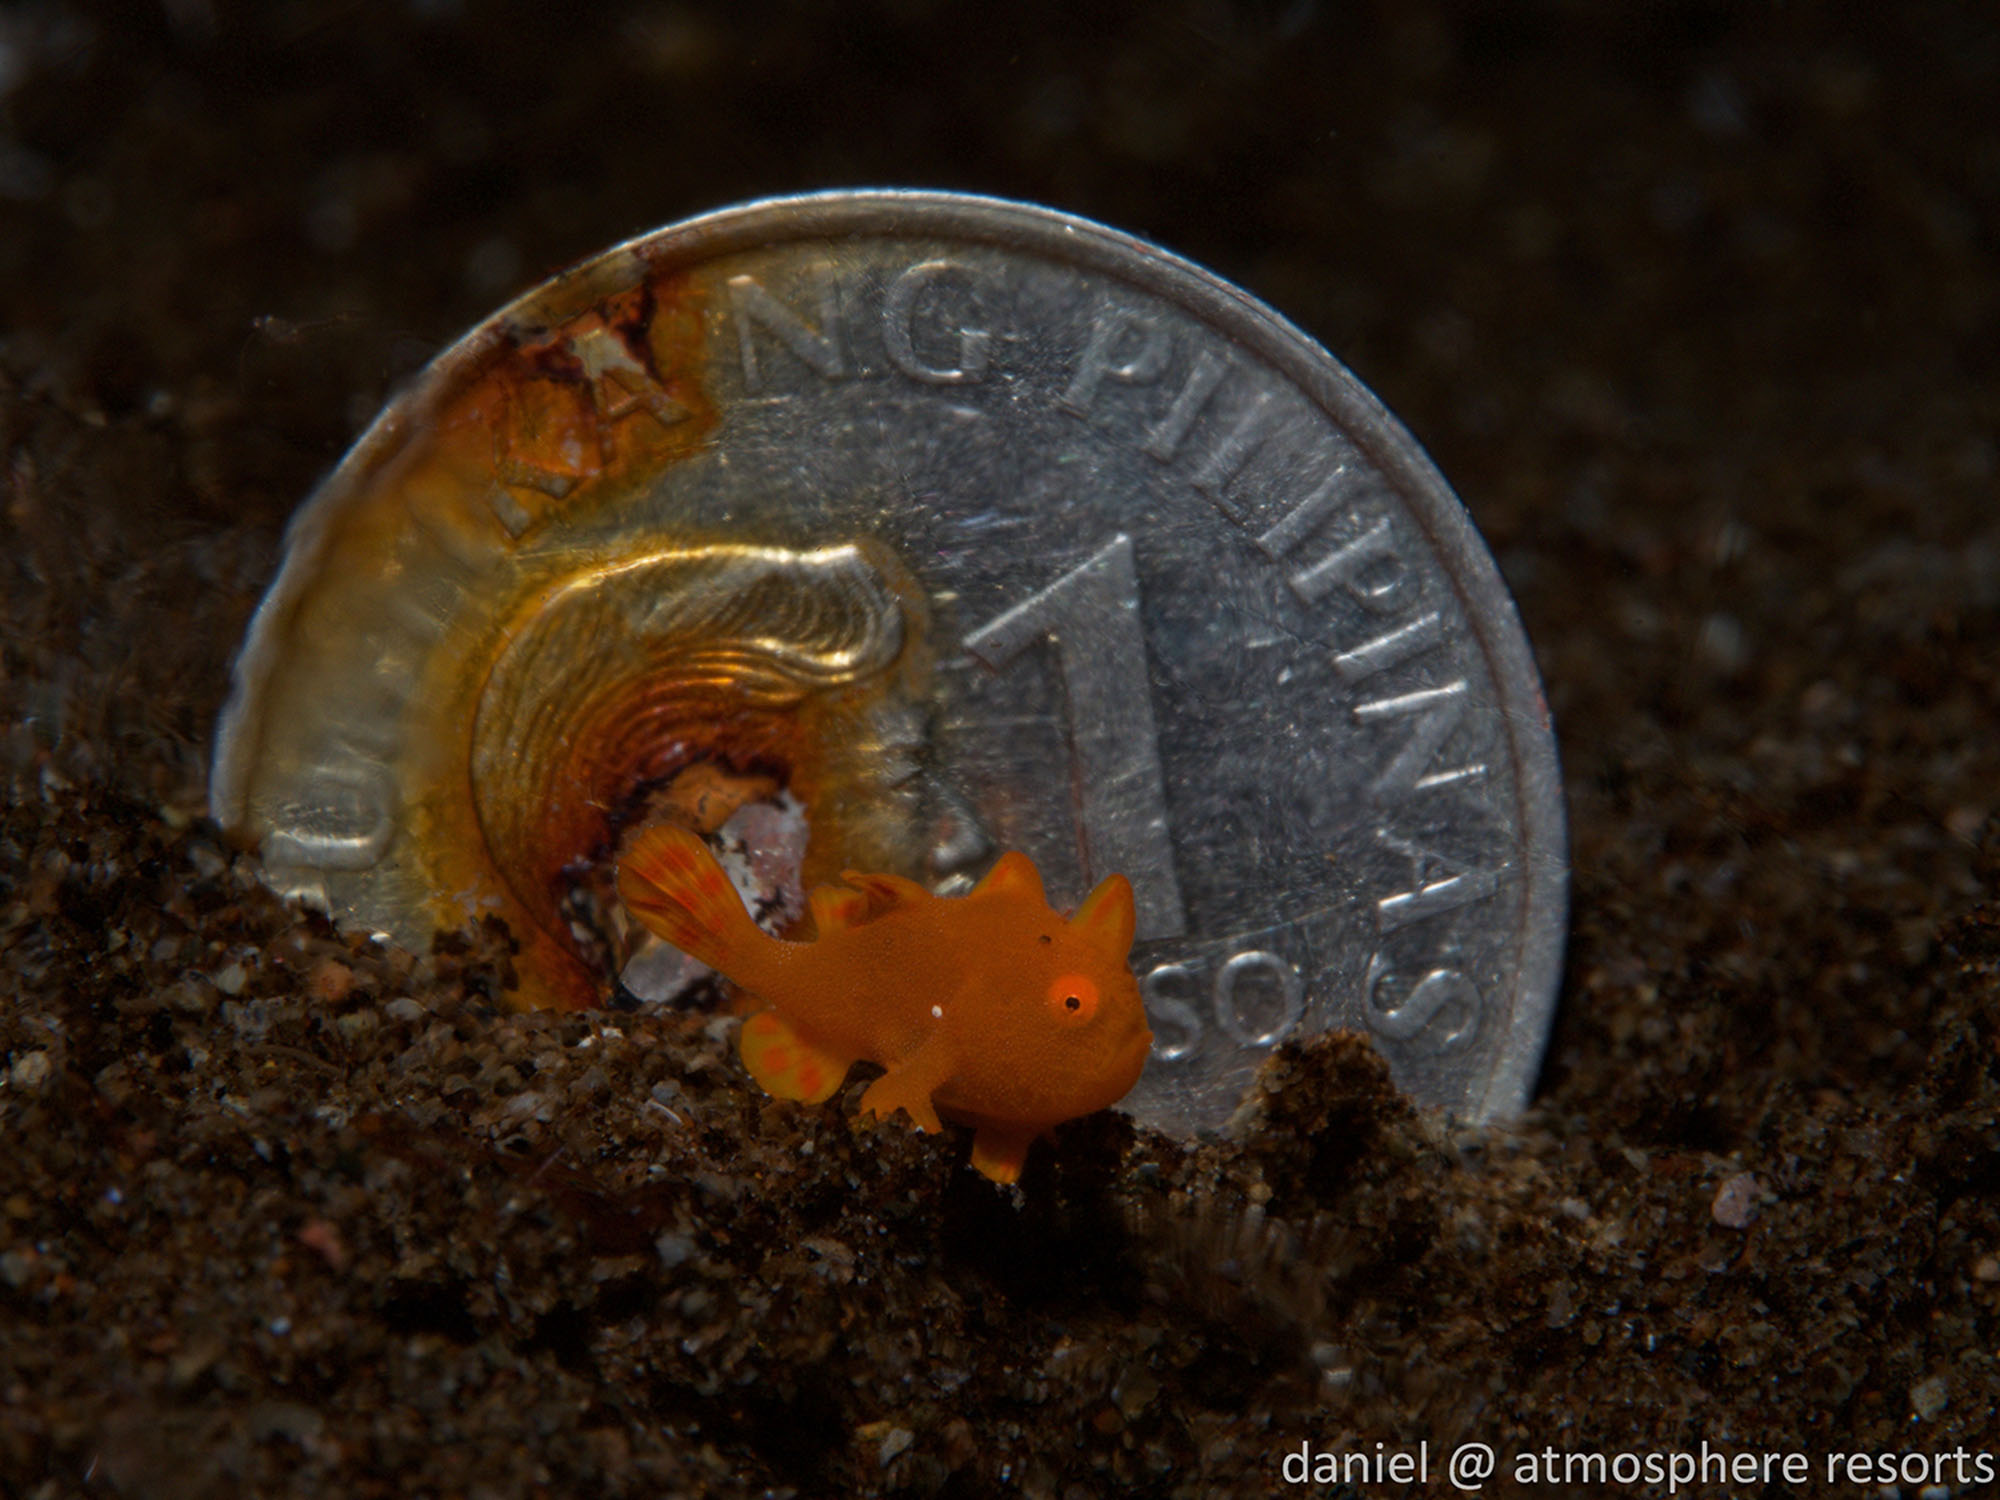 Peso coin baby frogfish - a favorite at Atmosphere in Dumaguete Philippines, photographed by Daniel Geary